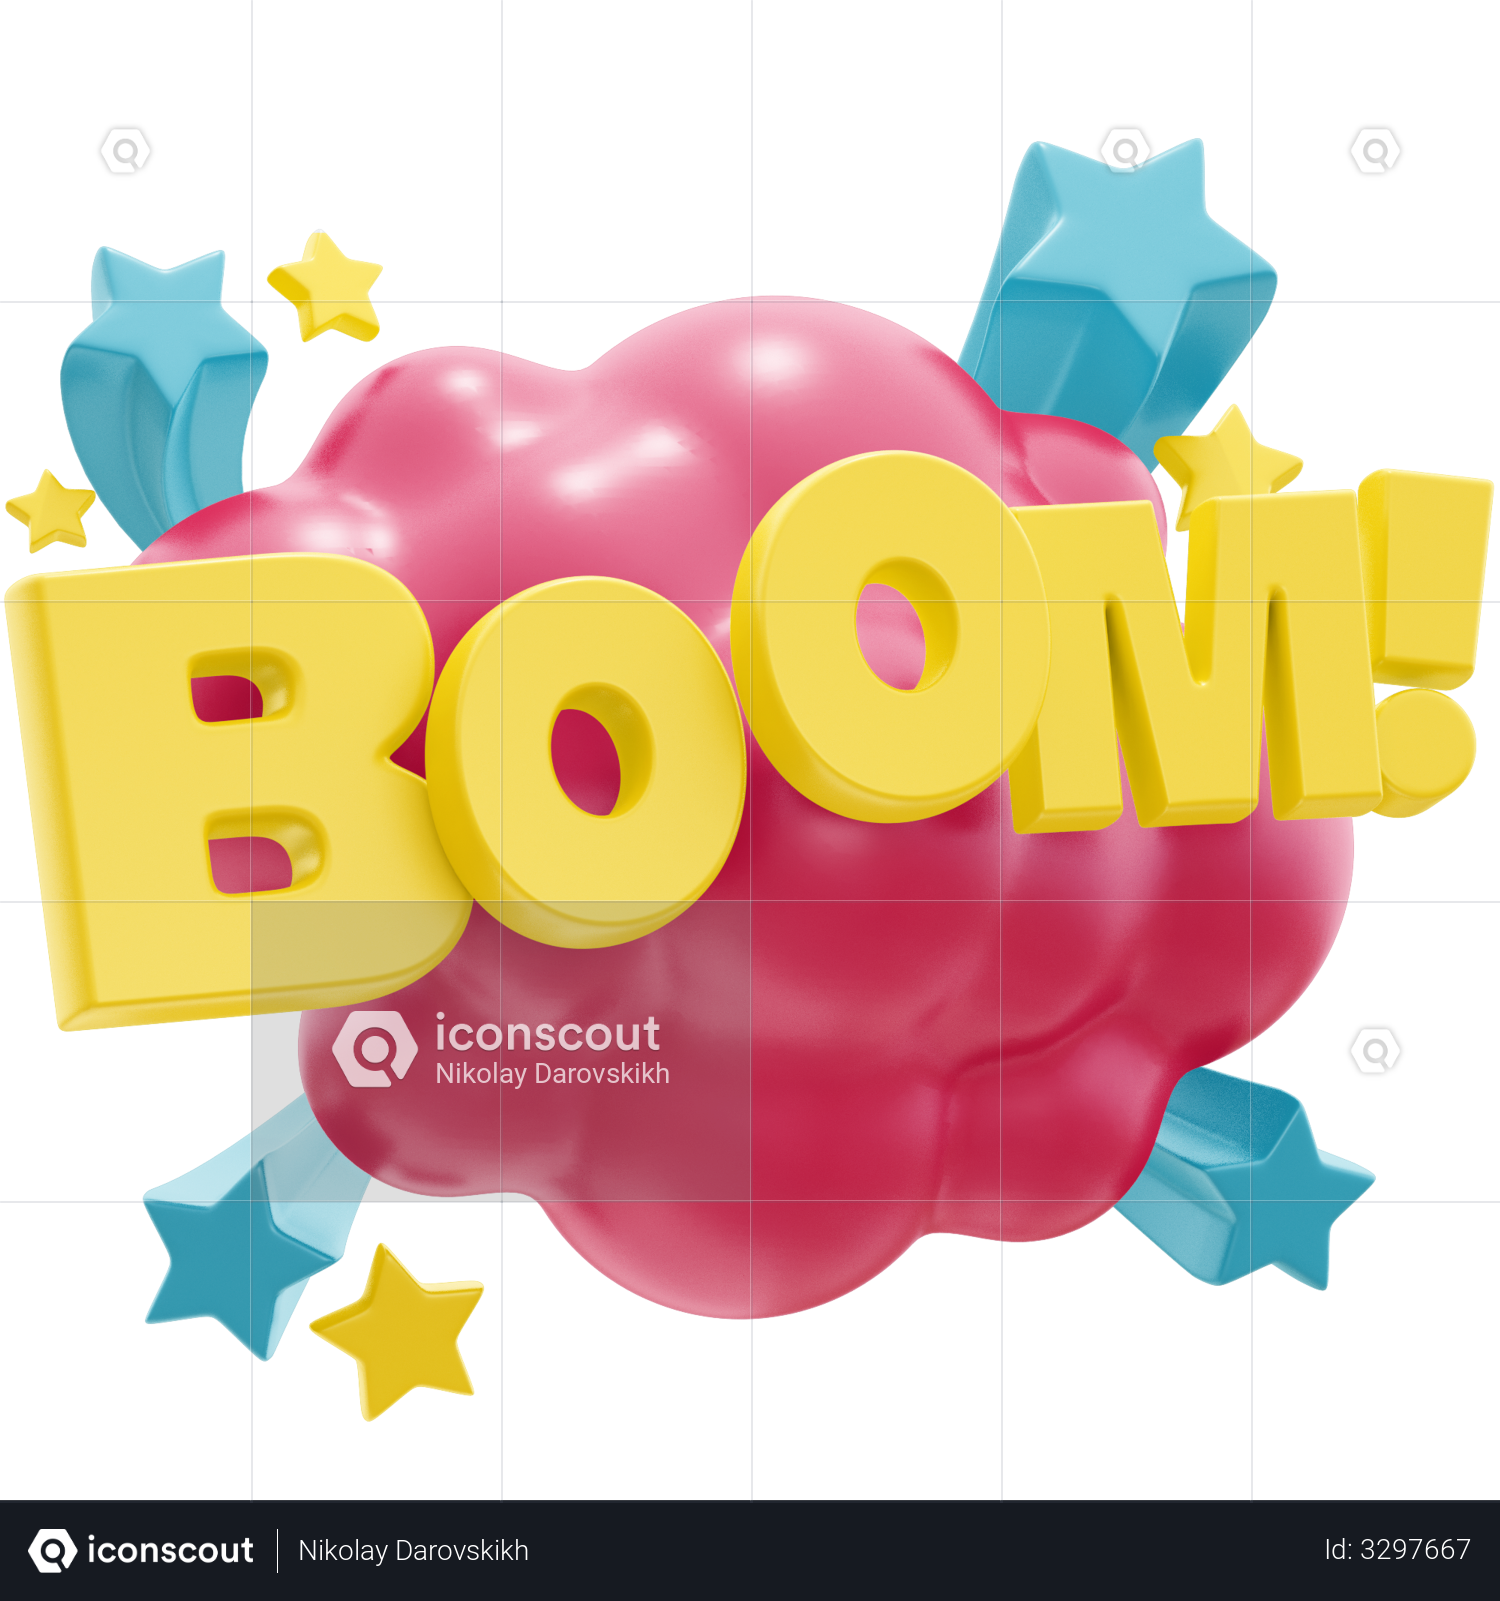 download the new for android Boom 3D